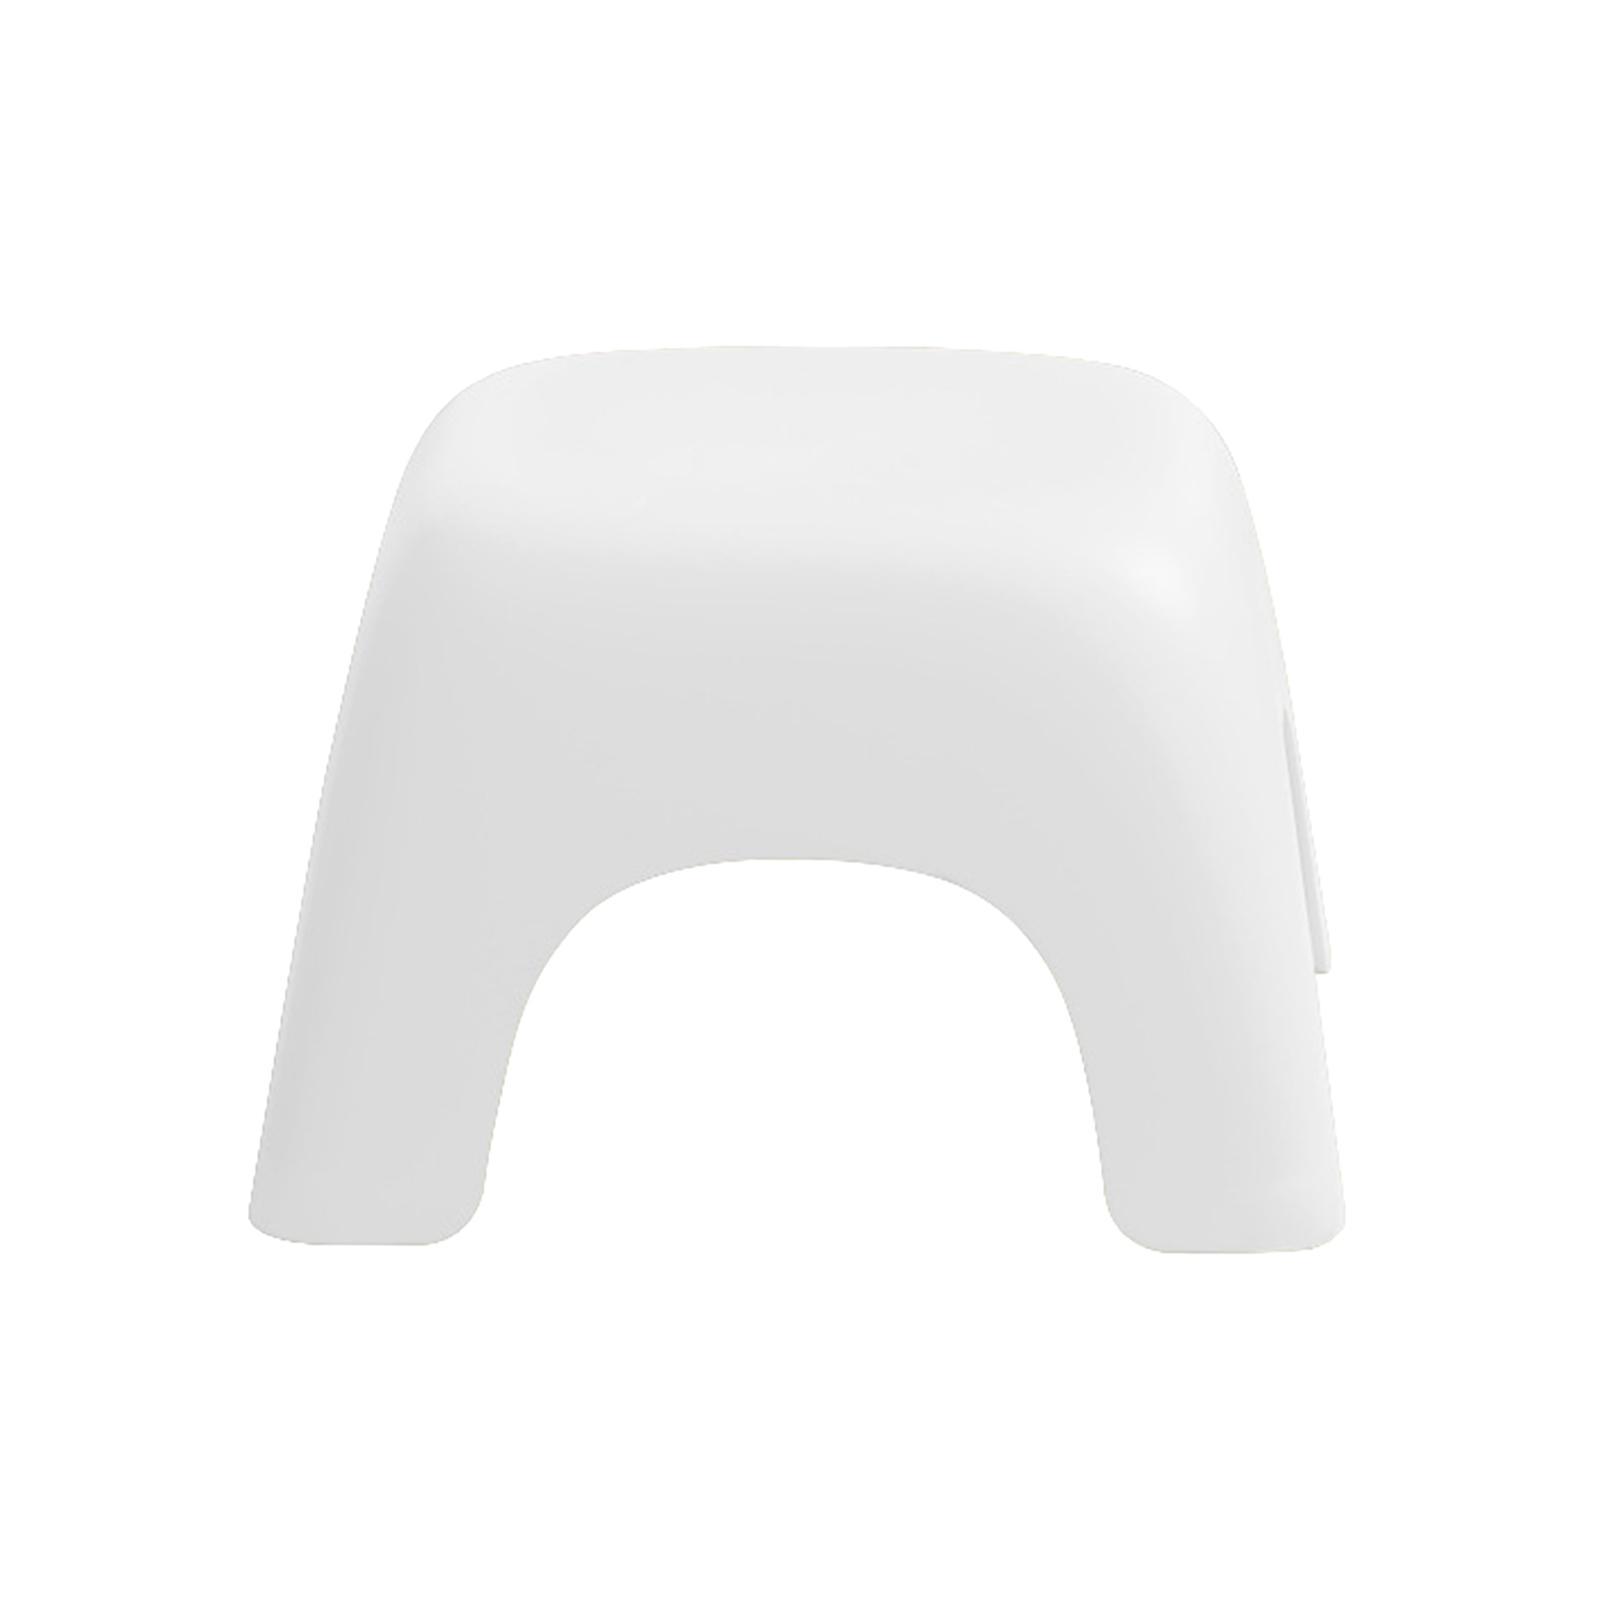 Portable Children Stool Decorative Thickened Solid for Kitchen Boys Girls White